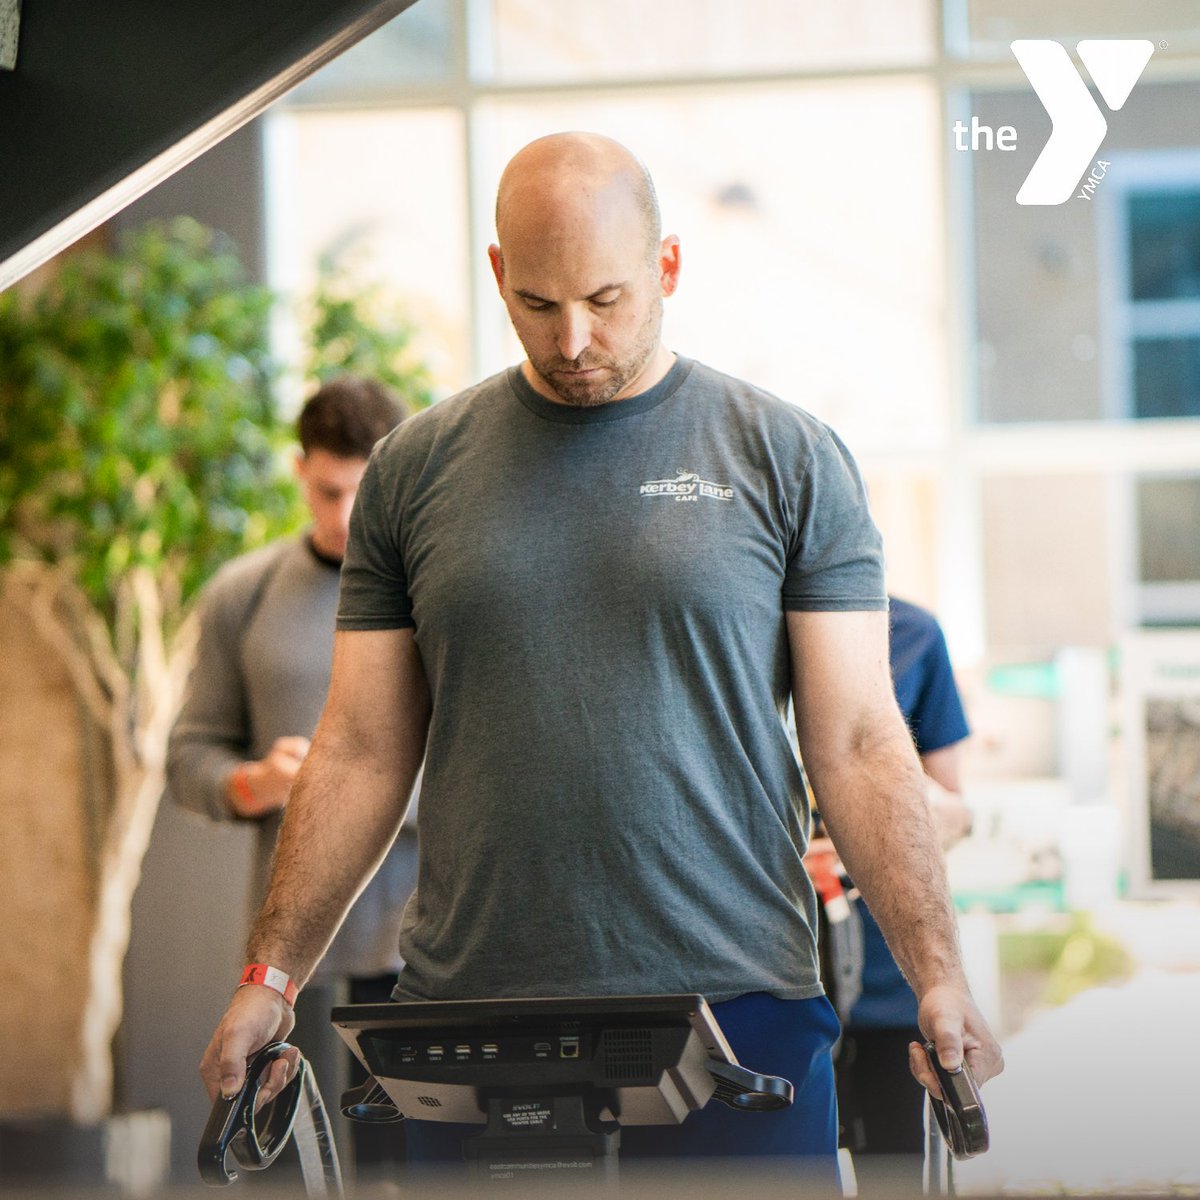 Build goals that complement your health and wellness with our expert YMCA personal trainers by trying the body composition analysis at the Y. Schedule your body composition analysis today. Members enjoy special pricing through 6/30! #WorkOut #Training #HealthandWelness #Fitness